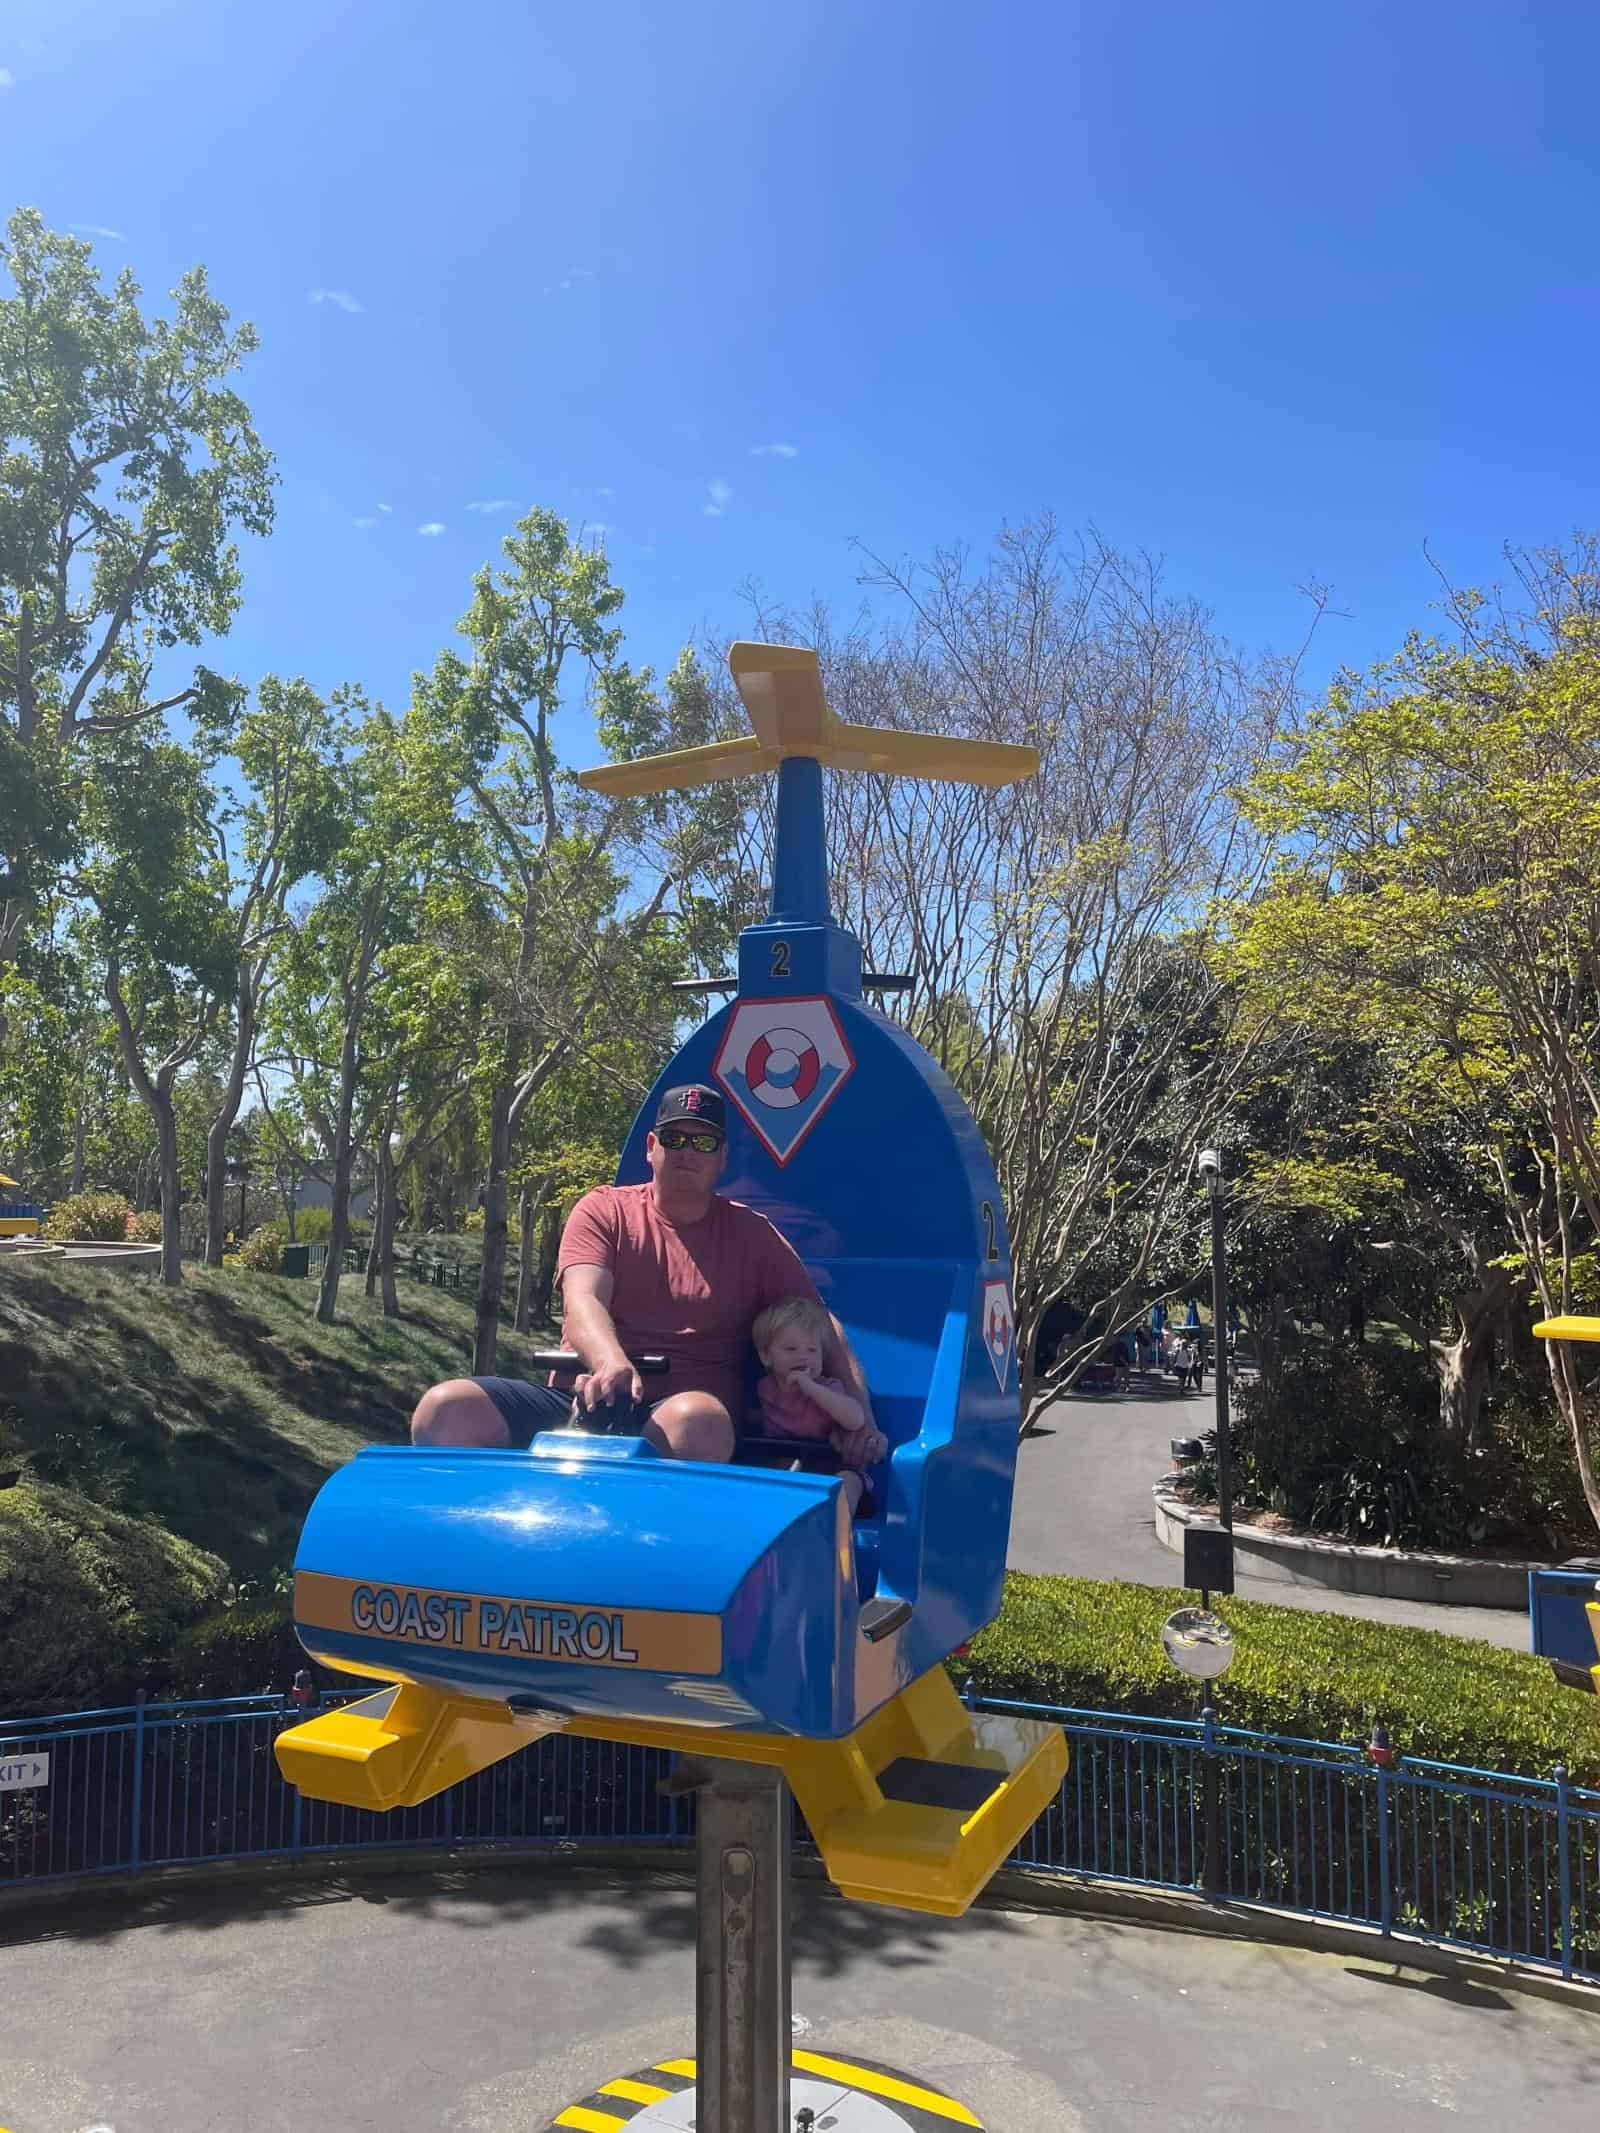 Best Legoland California Rides for toddlers